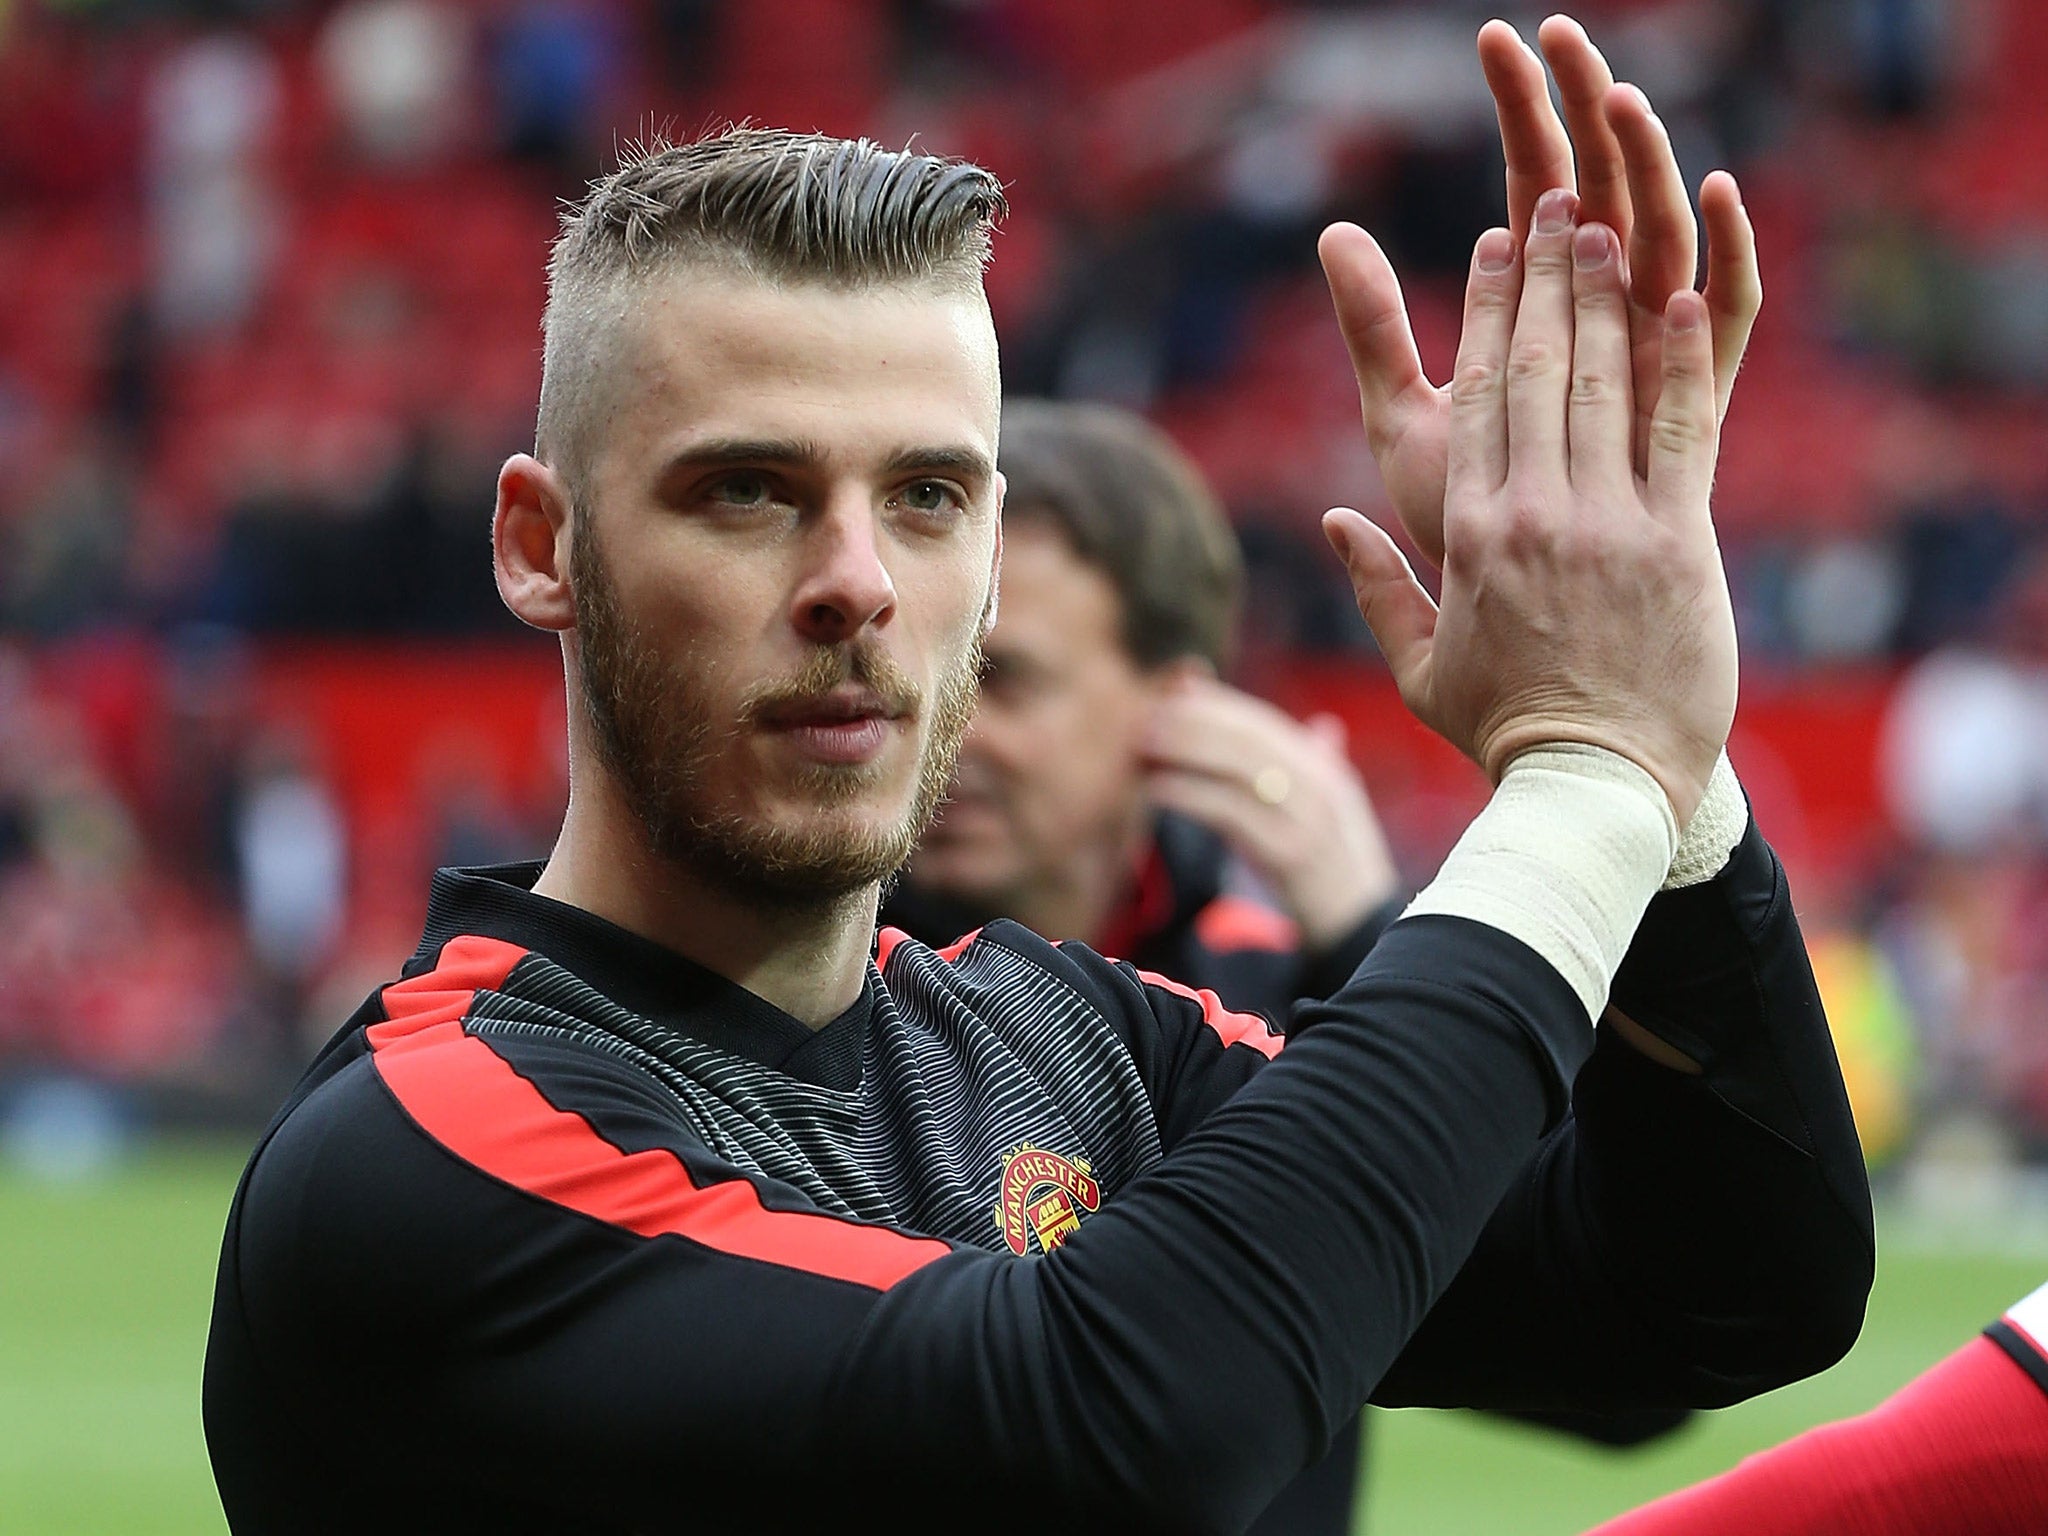 David De Gea appears to be staying at Manchester United